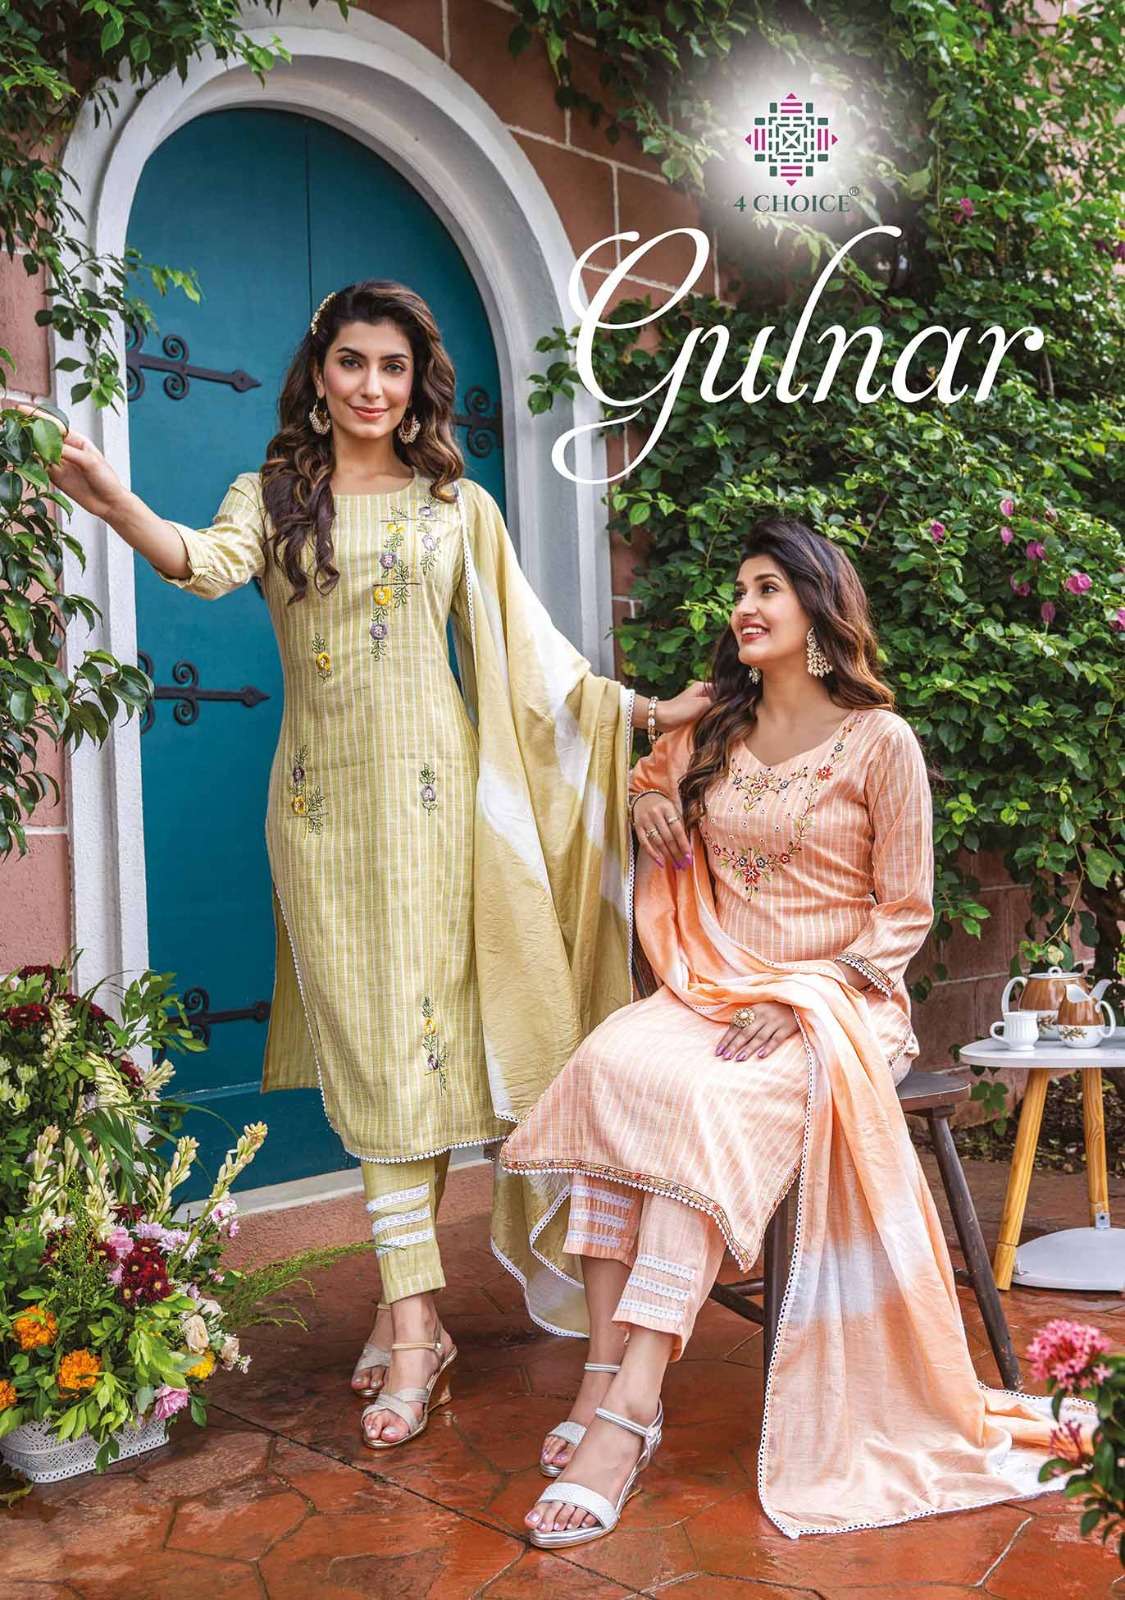 4 CHOICE GULNAR BOMBAY LUREX EMBROIDERY STITCHED SUITS WHOLE...